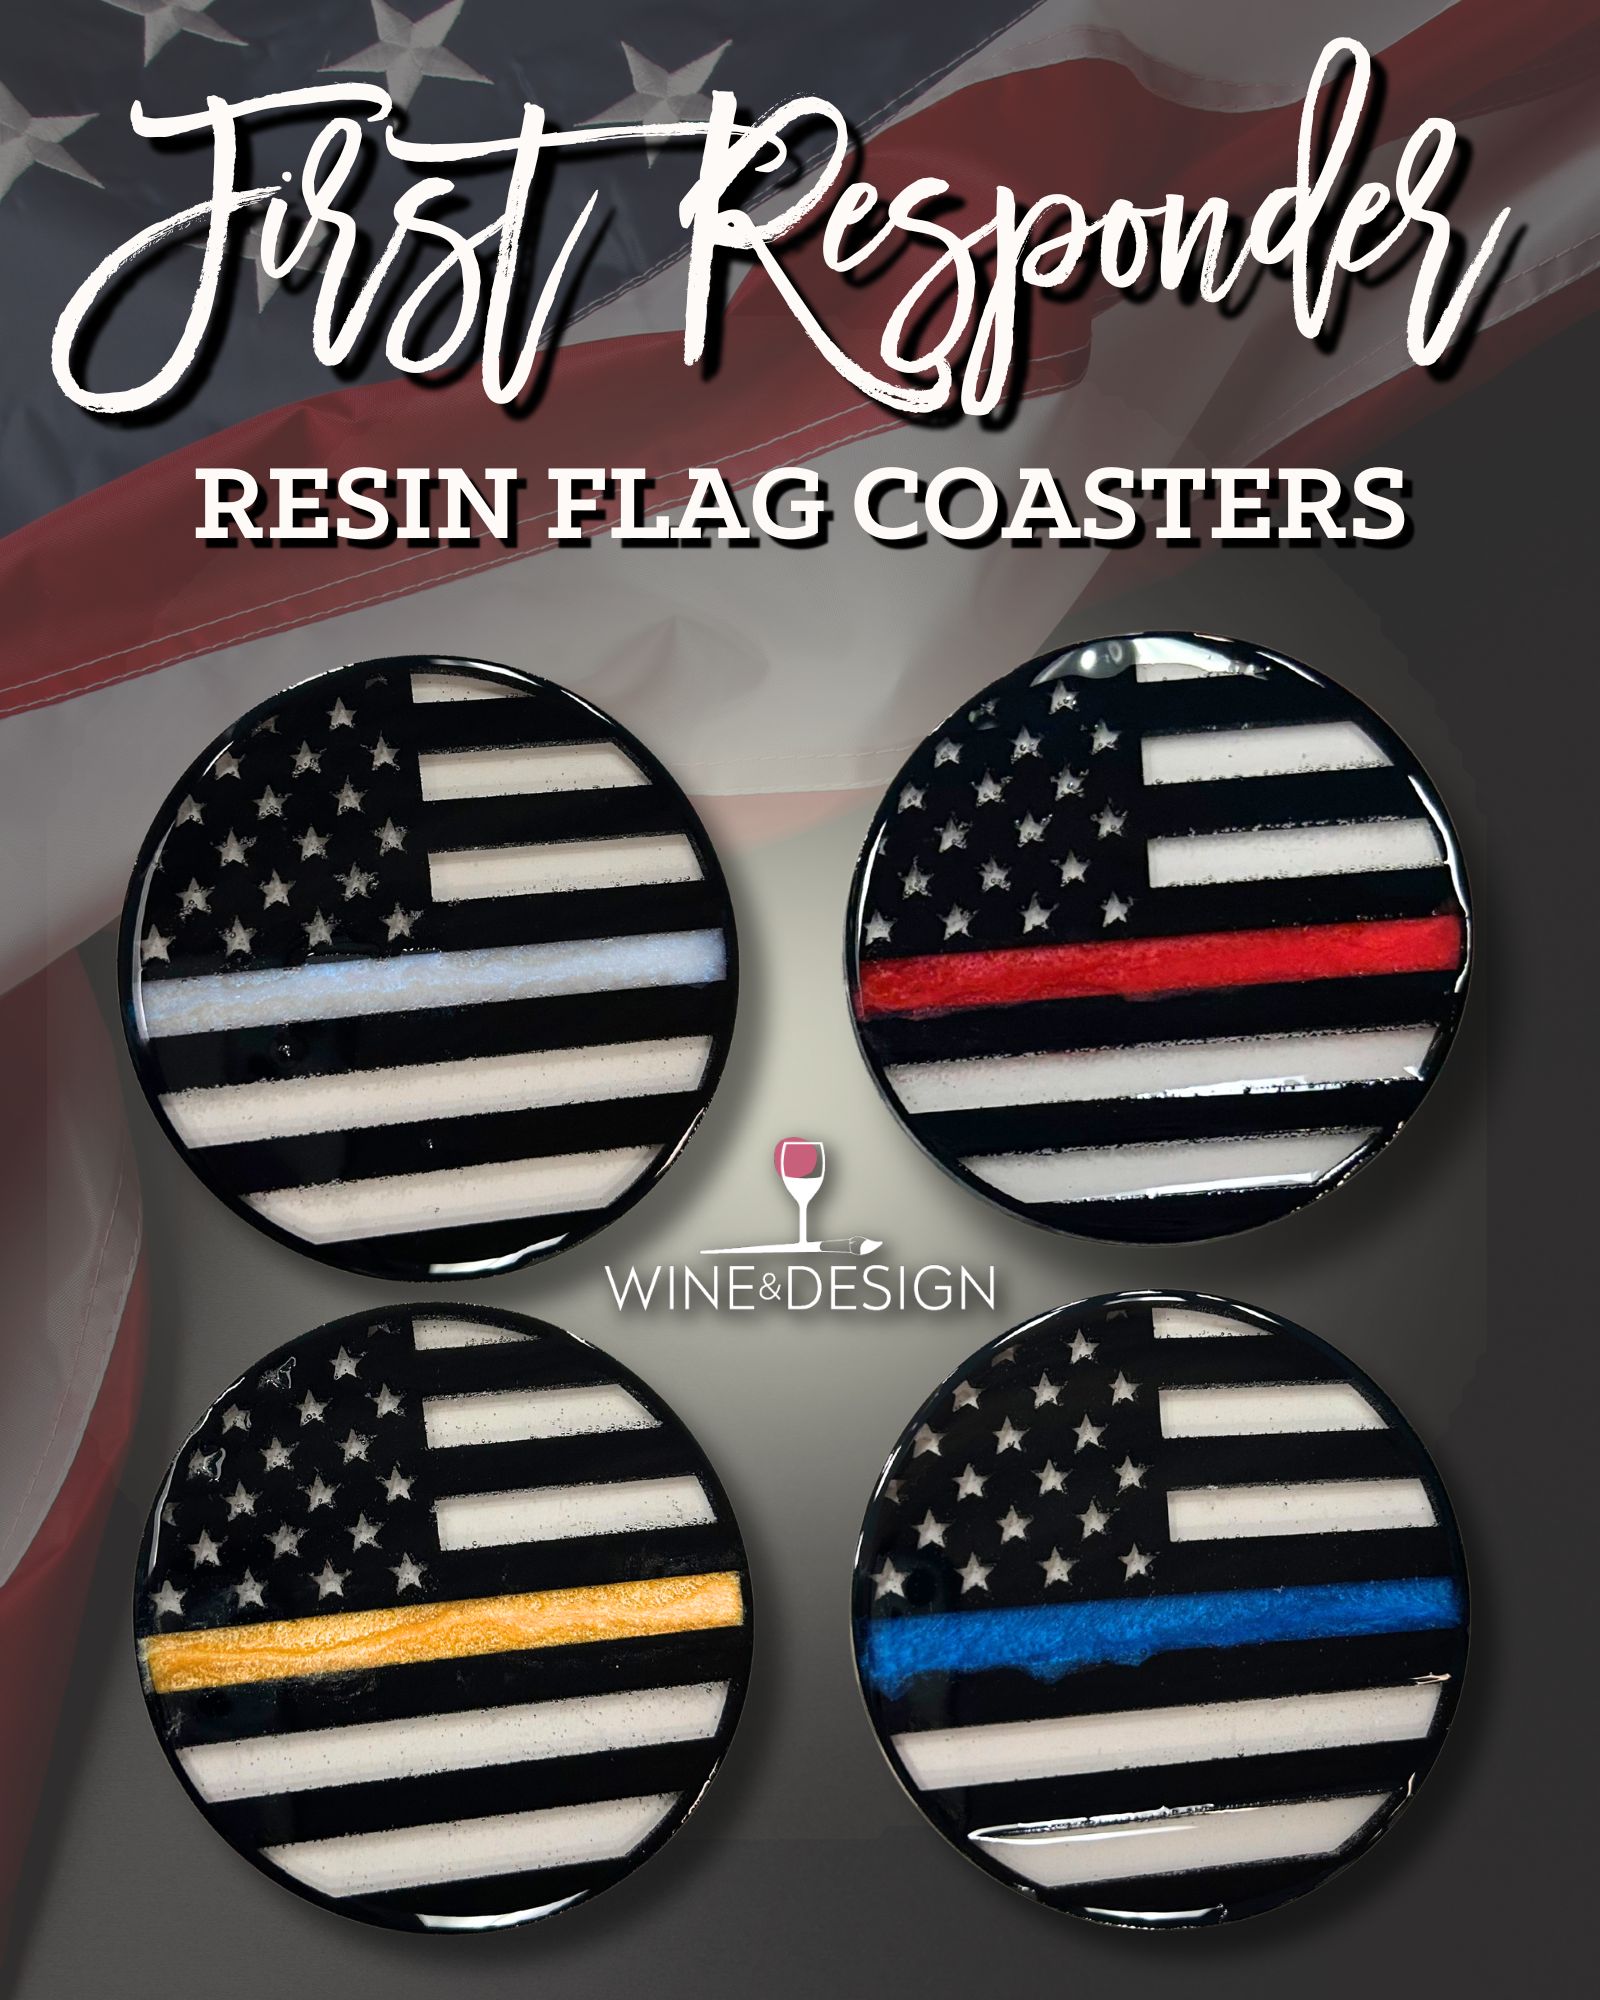 First Responder Resin Flag Coasters